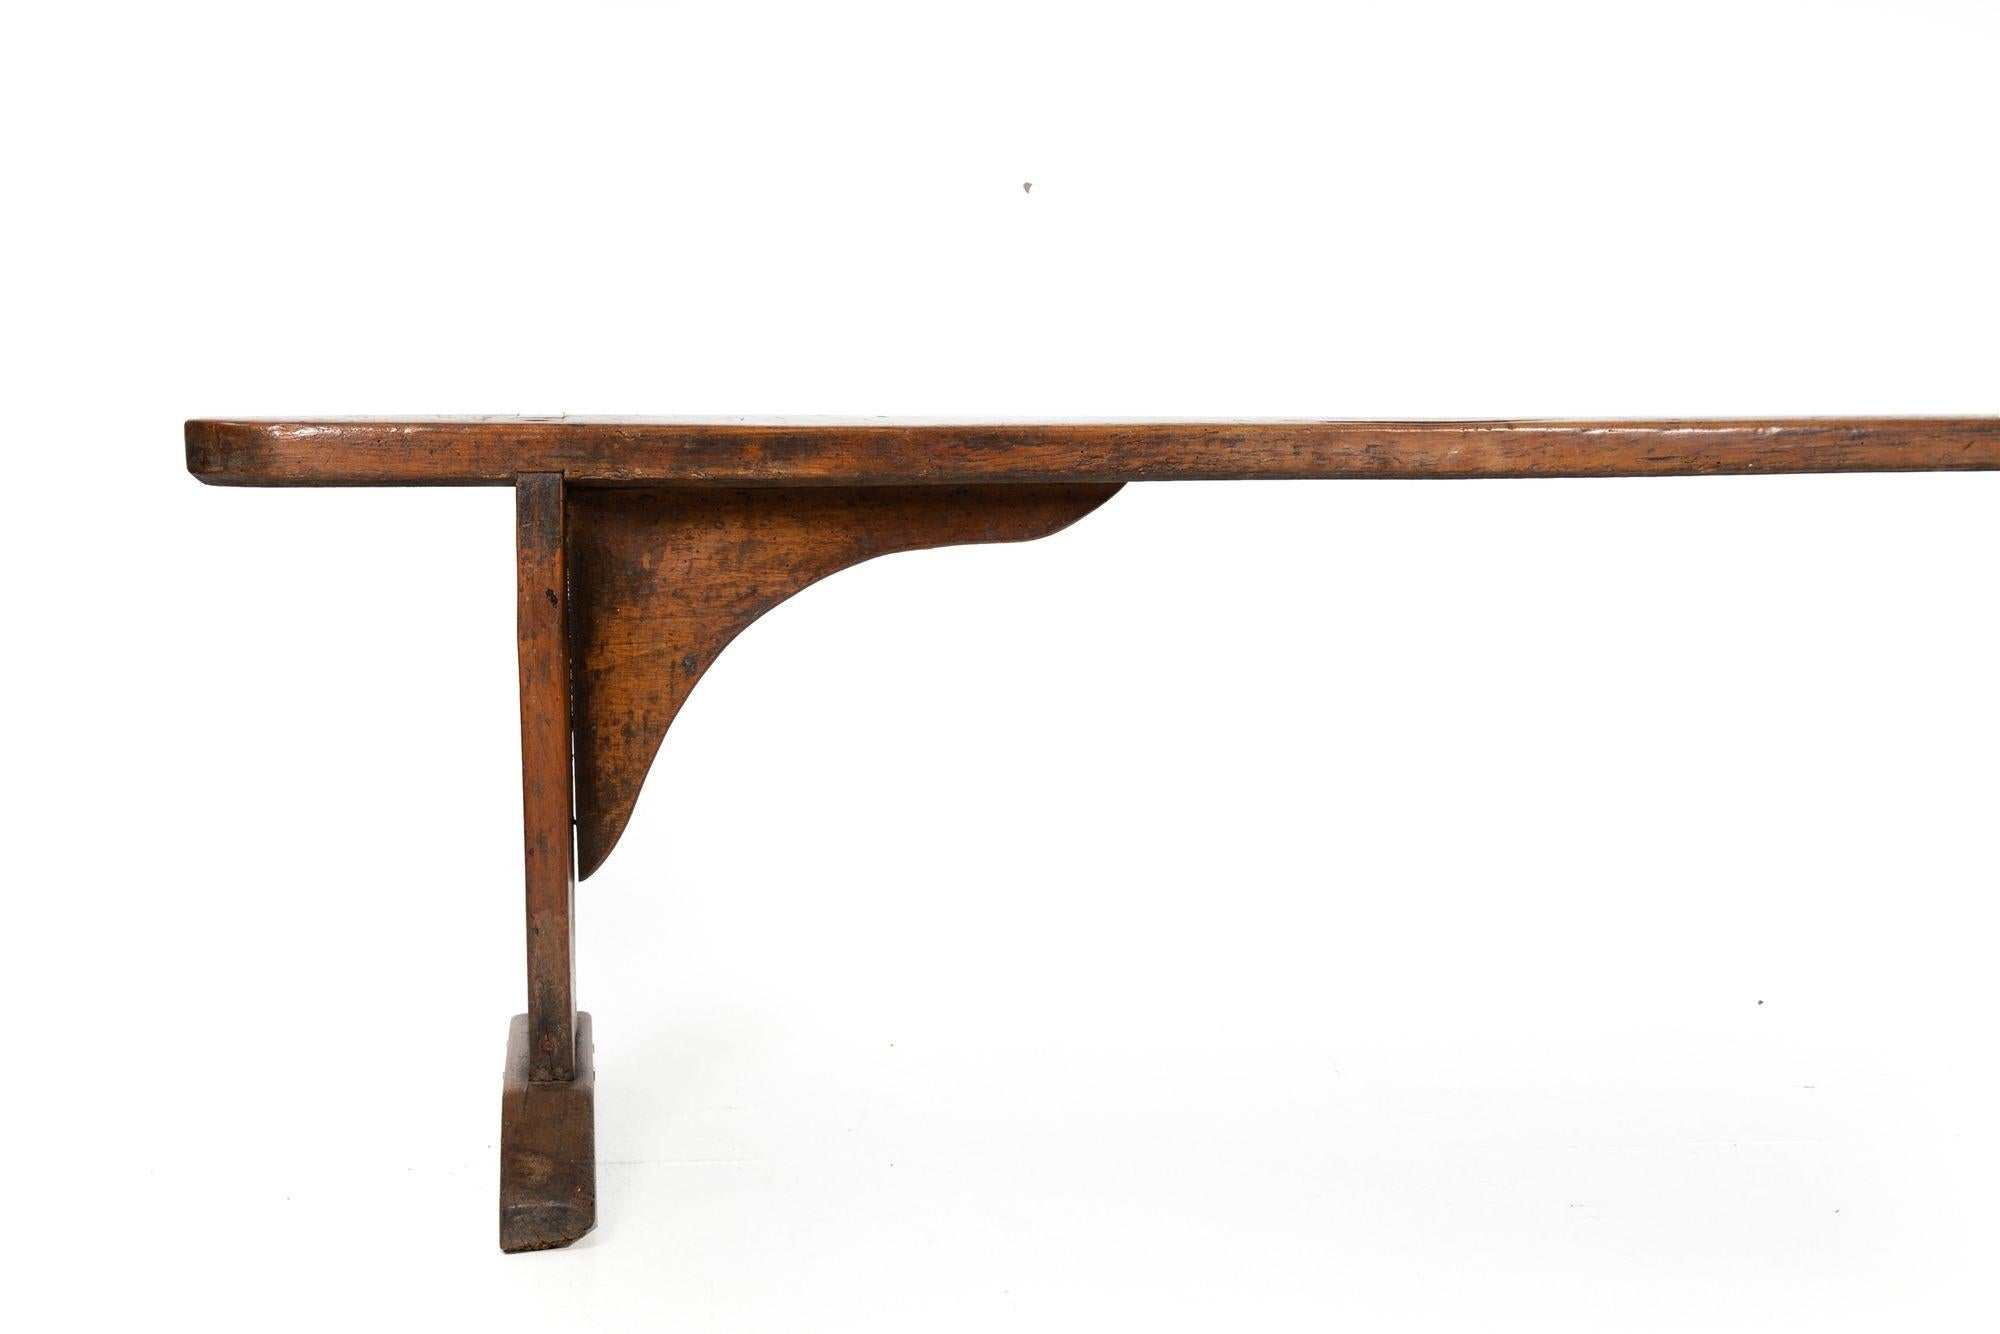 circa 1750 English Georgian Patinated and Worn Elm Trestle Bench For Sale 4